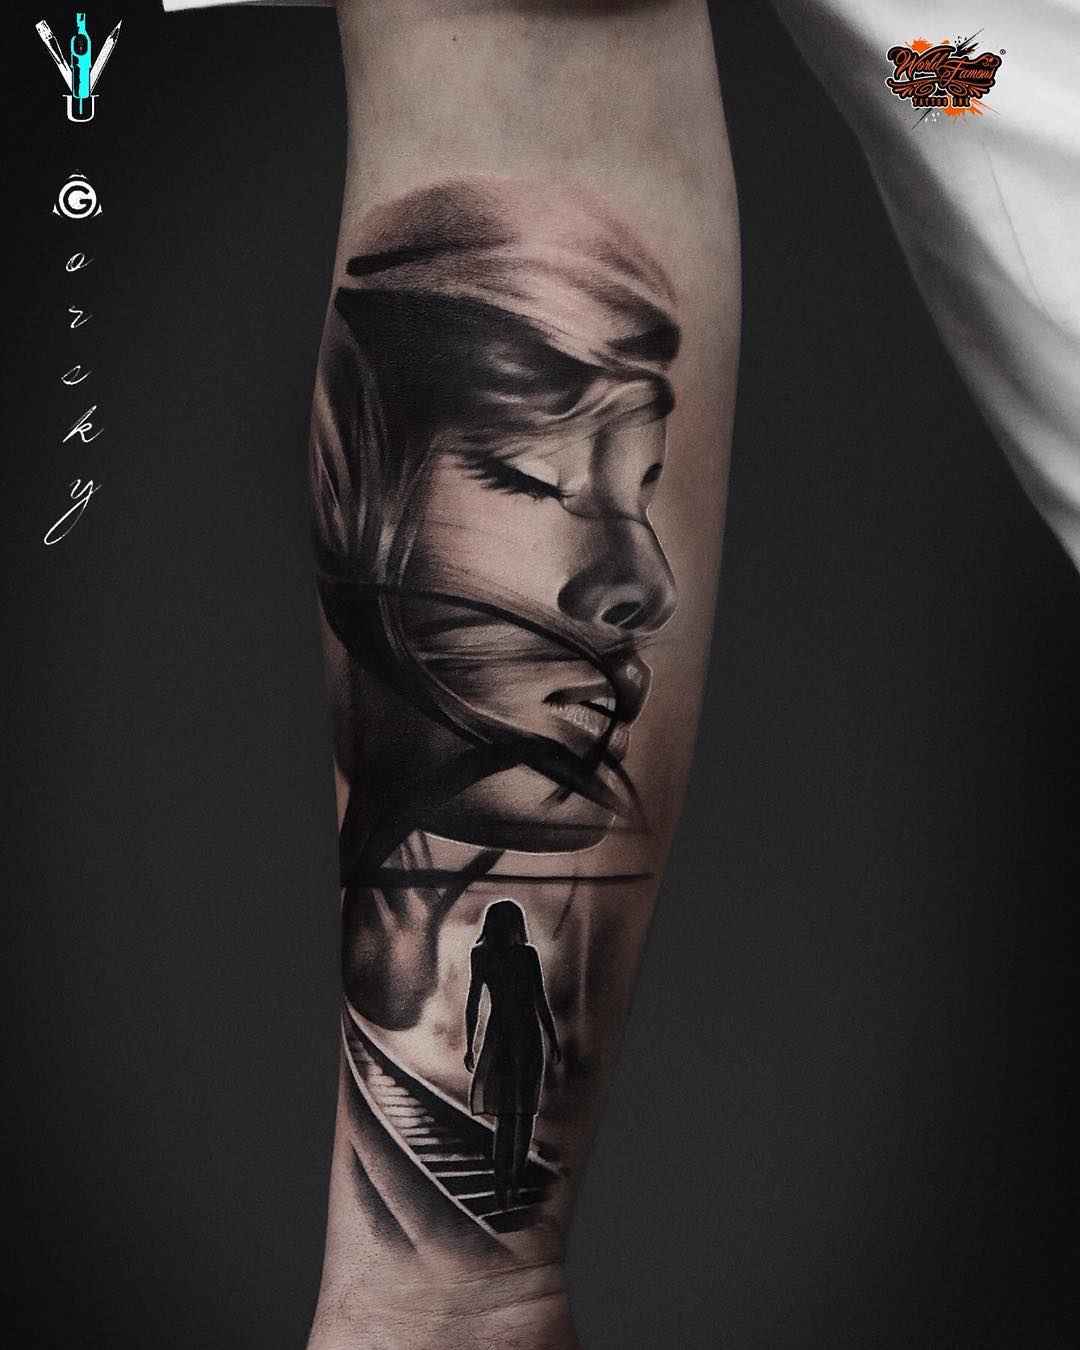 Ushuaia Tattoo London - Stunning tattoo done from our artist Damian Gorsky!  It looks amazing! 󾌧 Studio proudly sponsored by the best: World Famous  Tattoo Ink and Killer Ink Tattoo ⬇⬇⬇ Bookings :